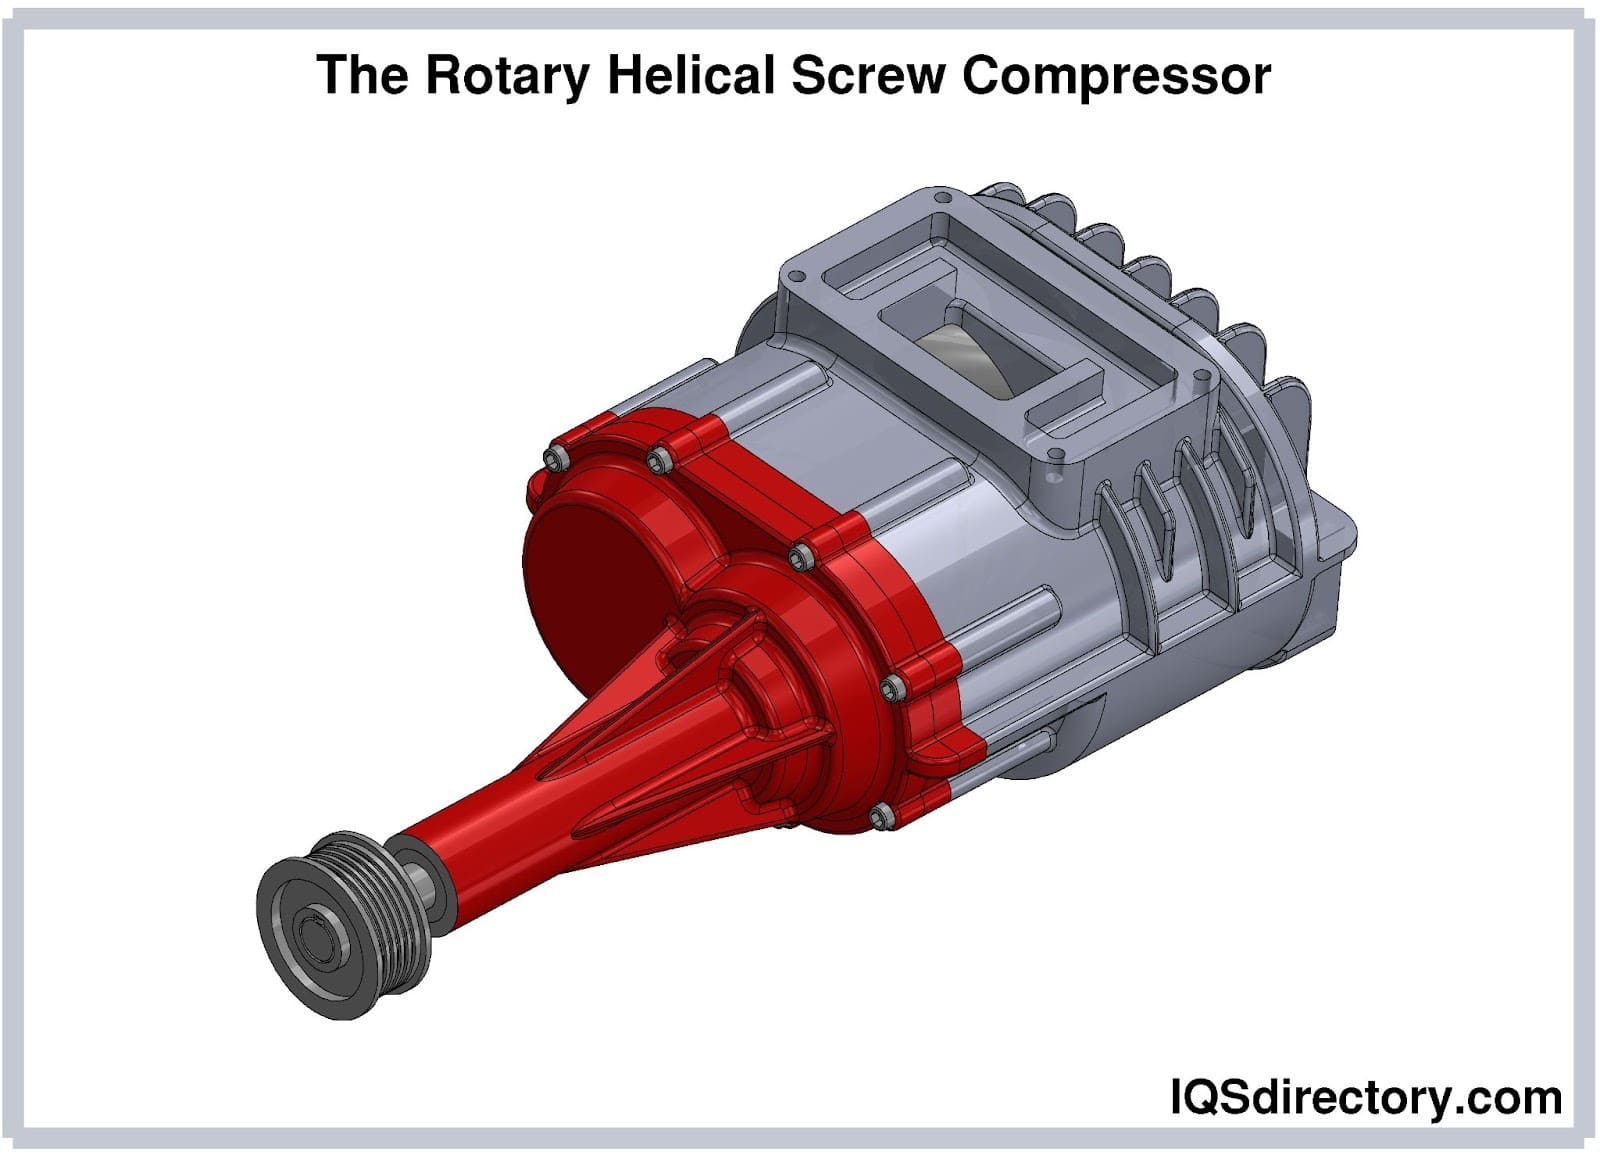 The Rotary Helical Screw Compressor